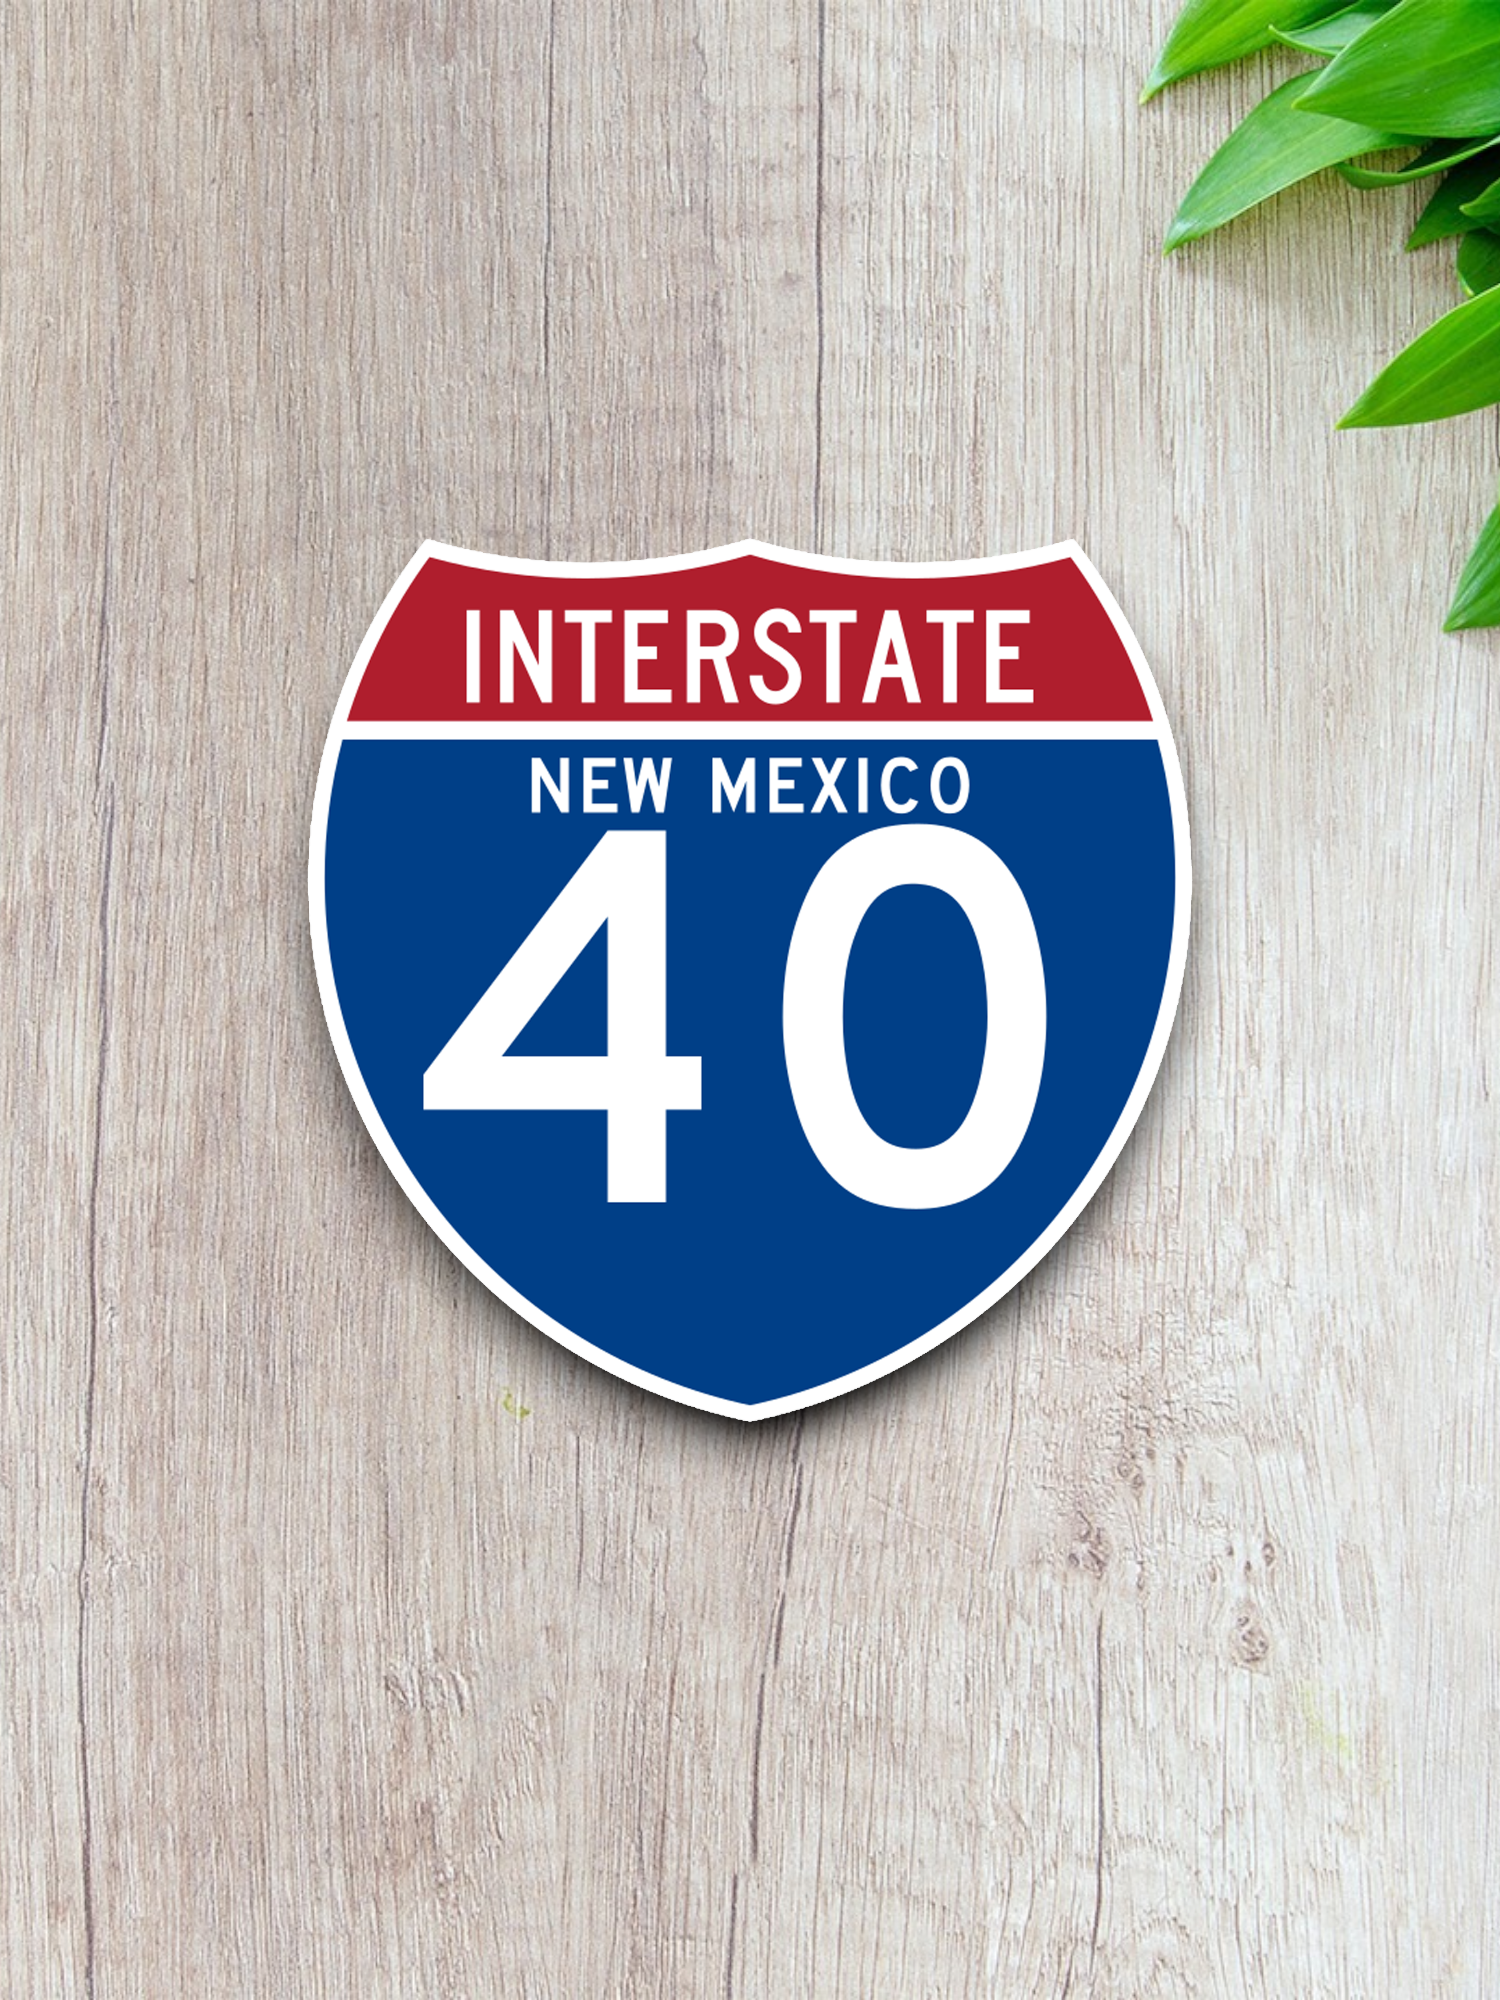 Interstate I-40 New Mexico - Road Sign Sticker